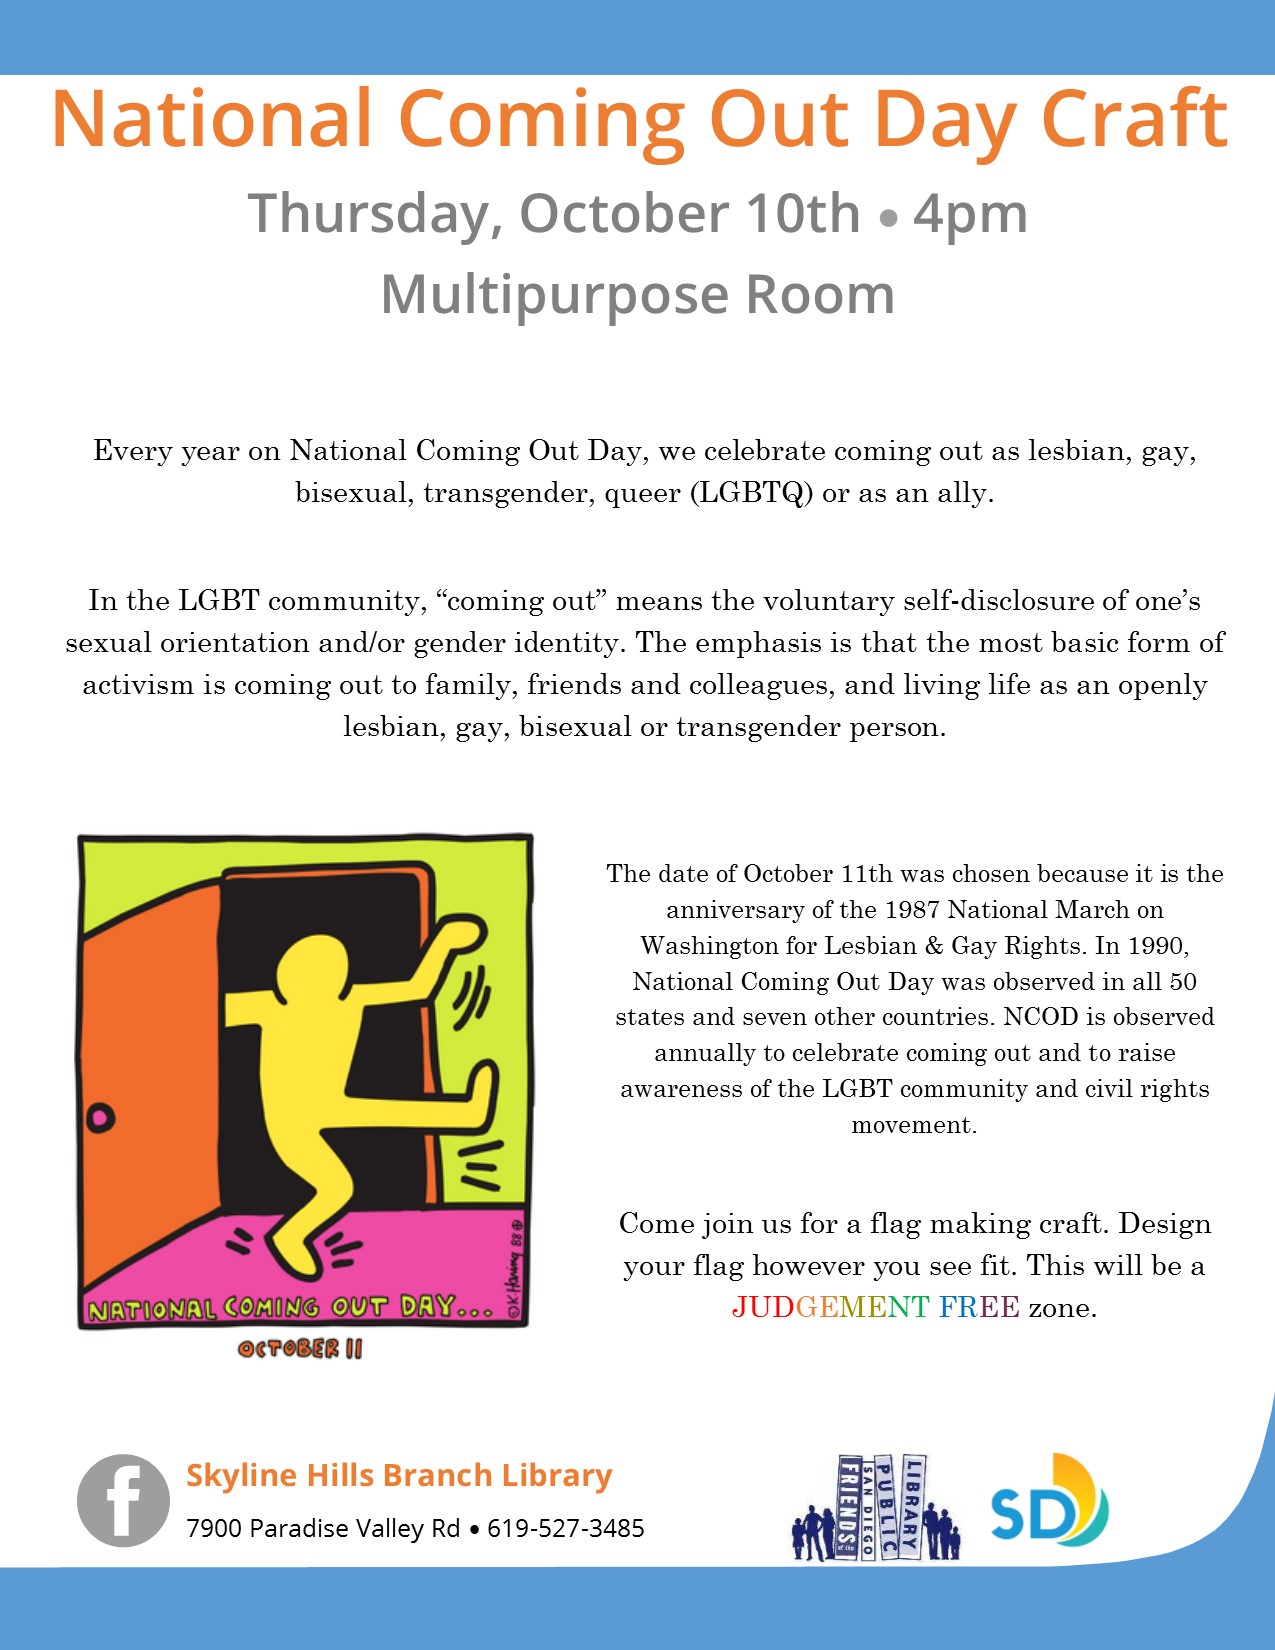 Flyer promoting National Coming Out Day Craft